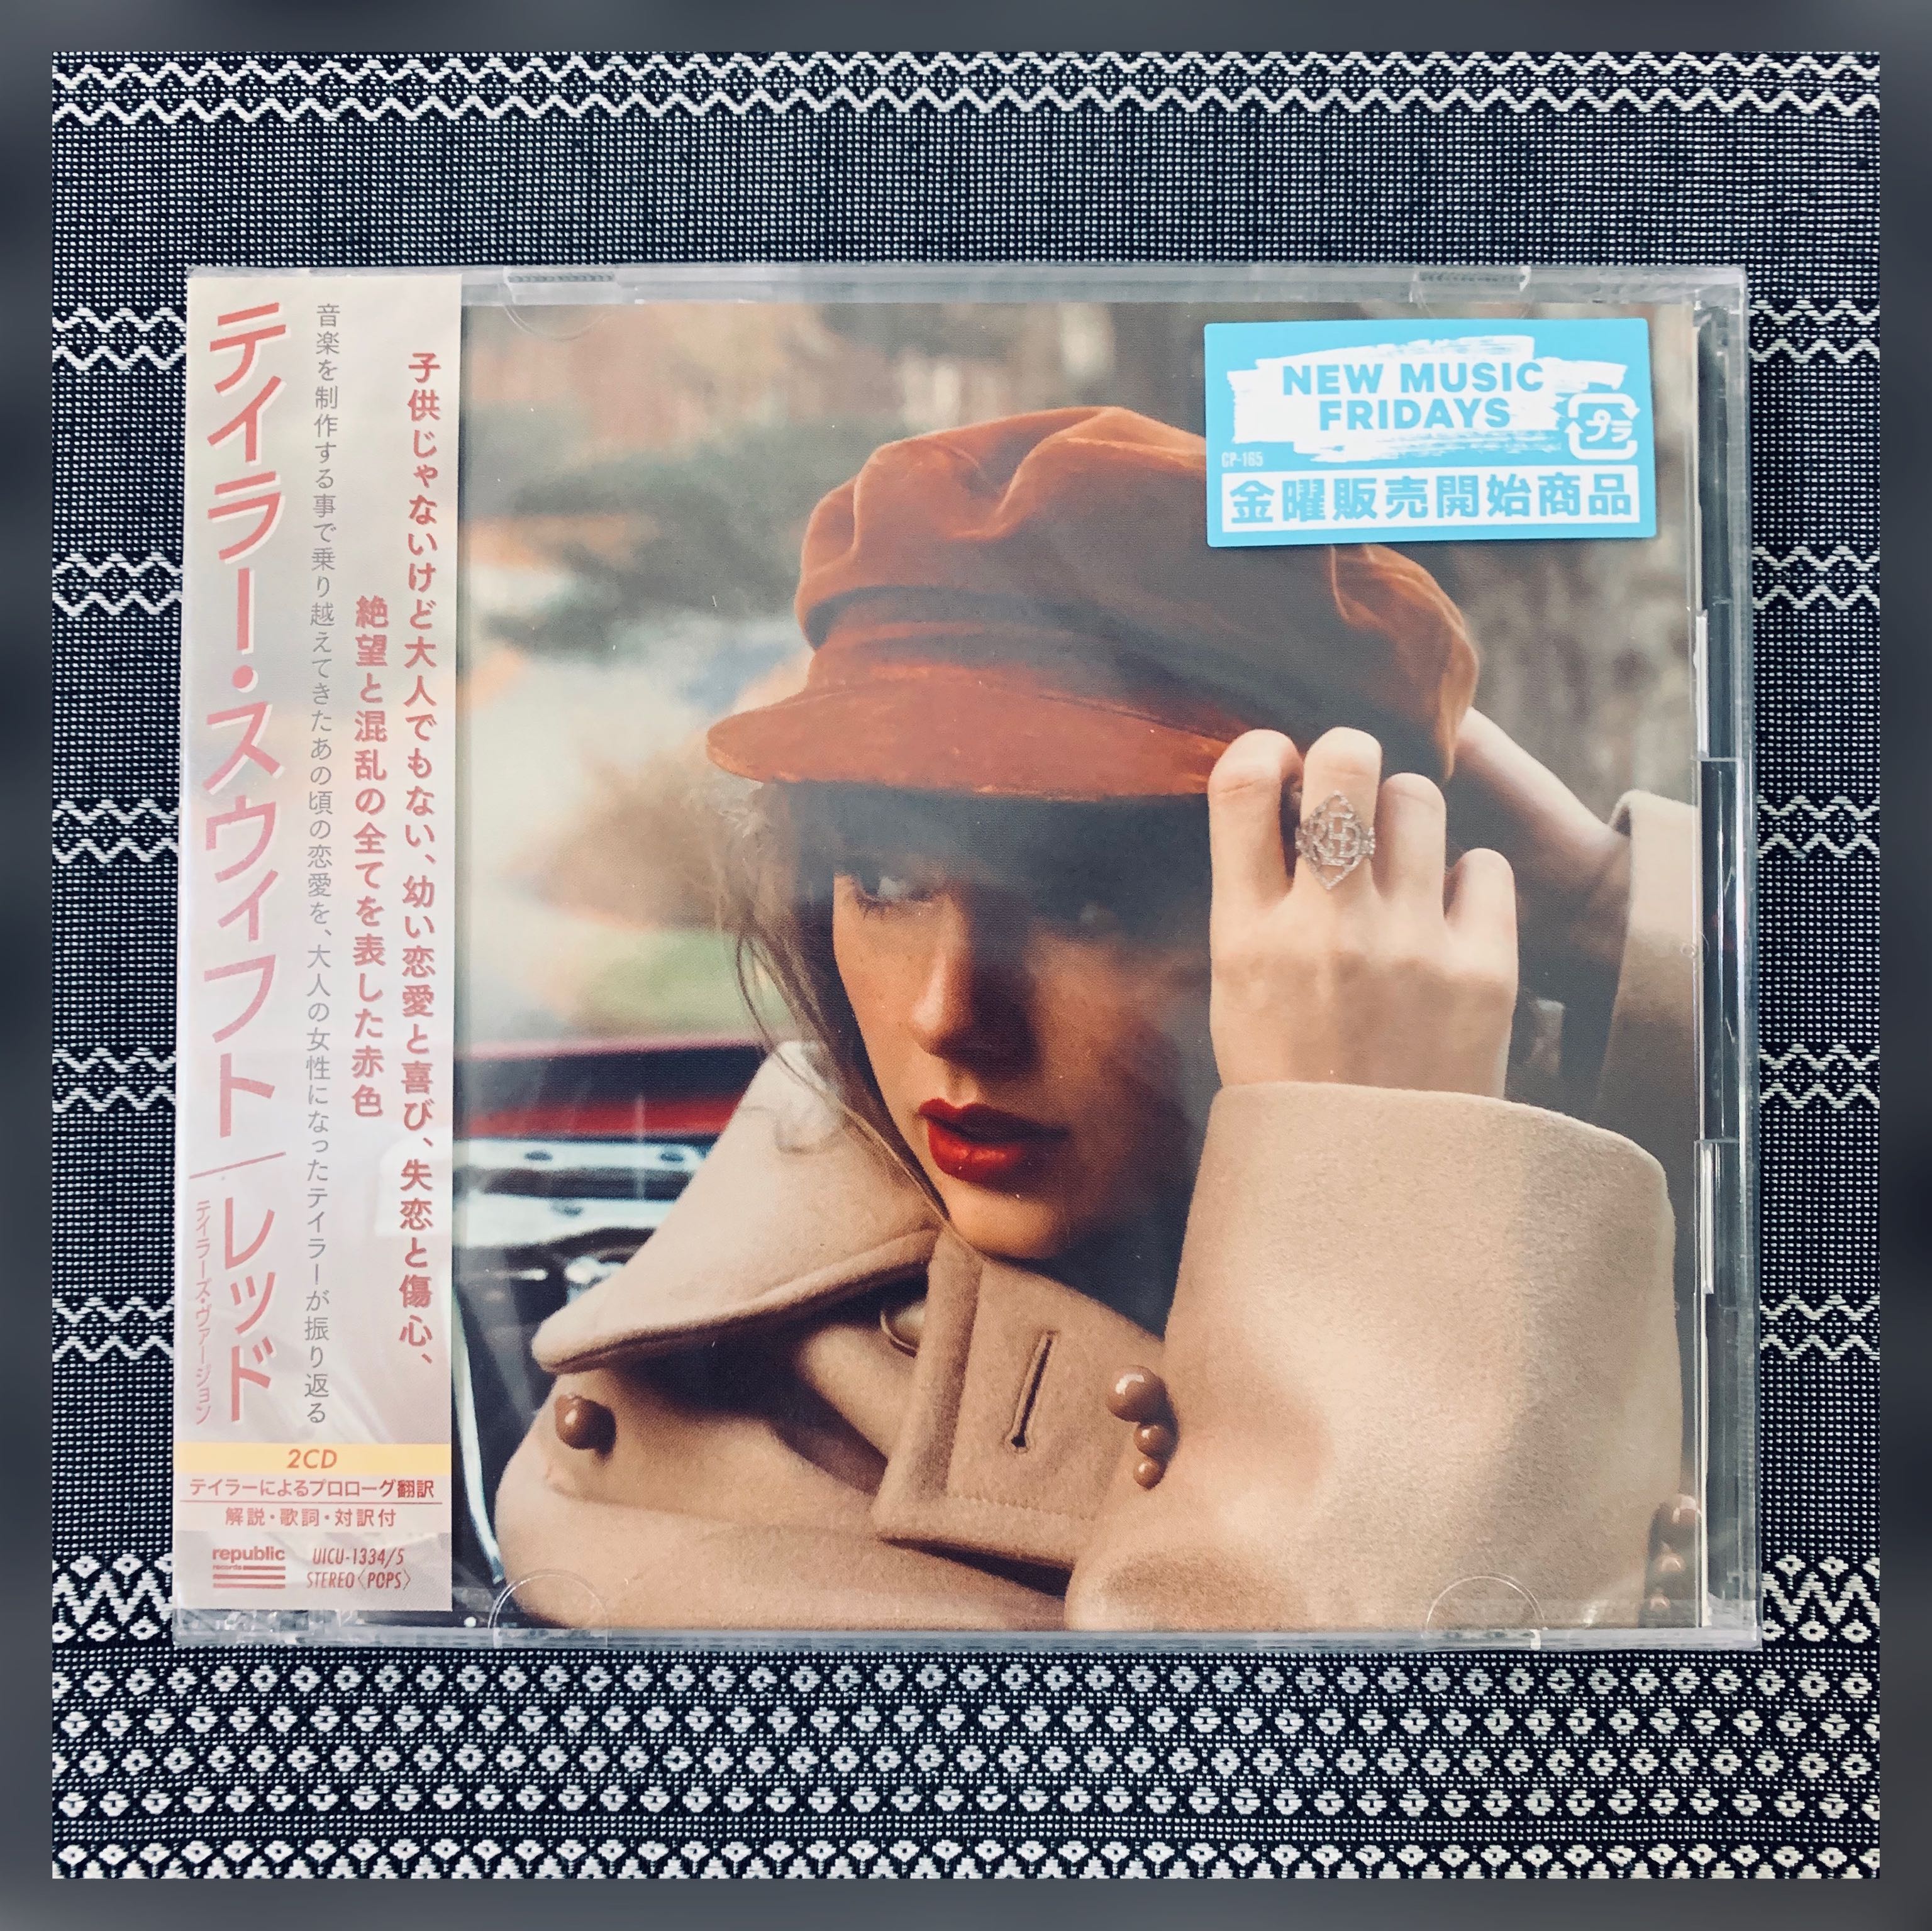 Taylor Swift - Red - CD